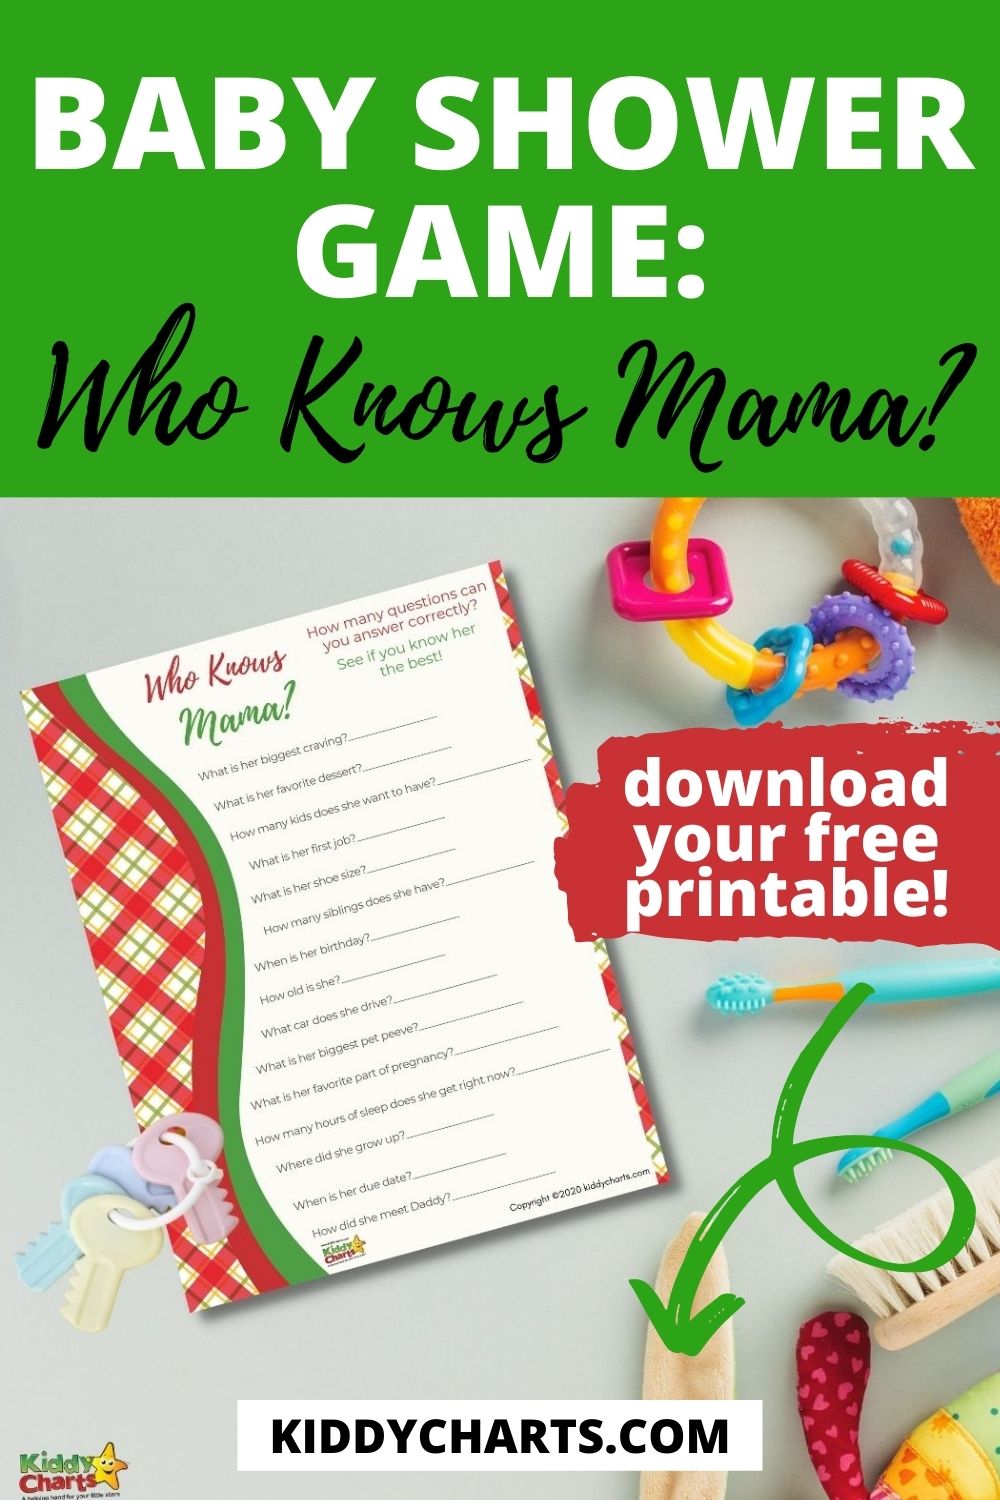 Baby Shower game: Who knows Mama?